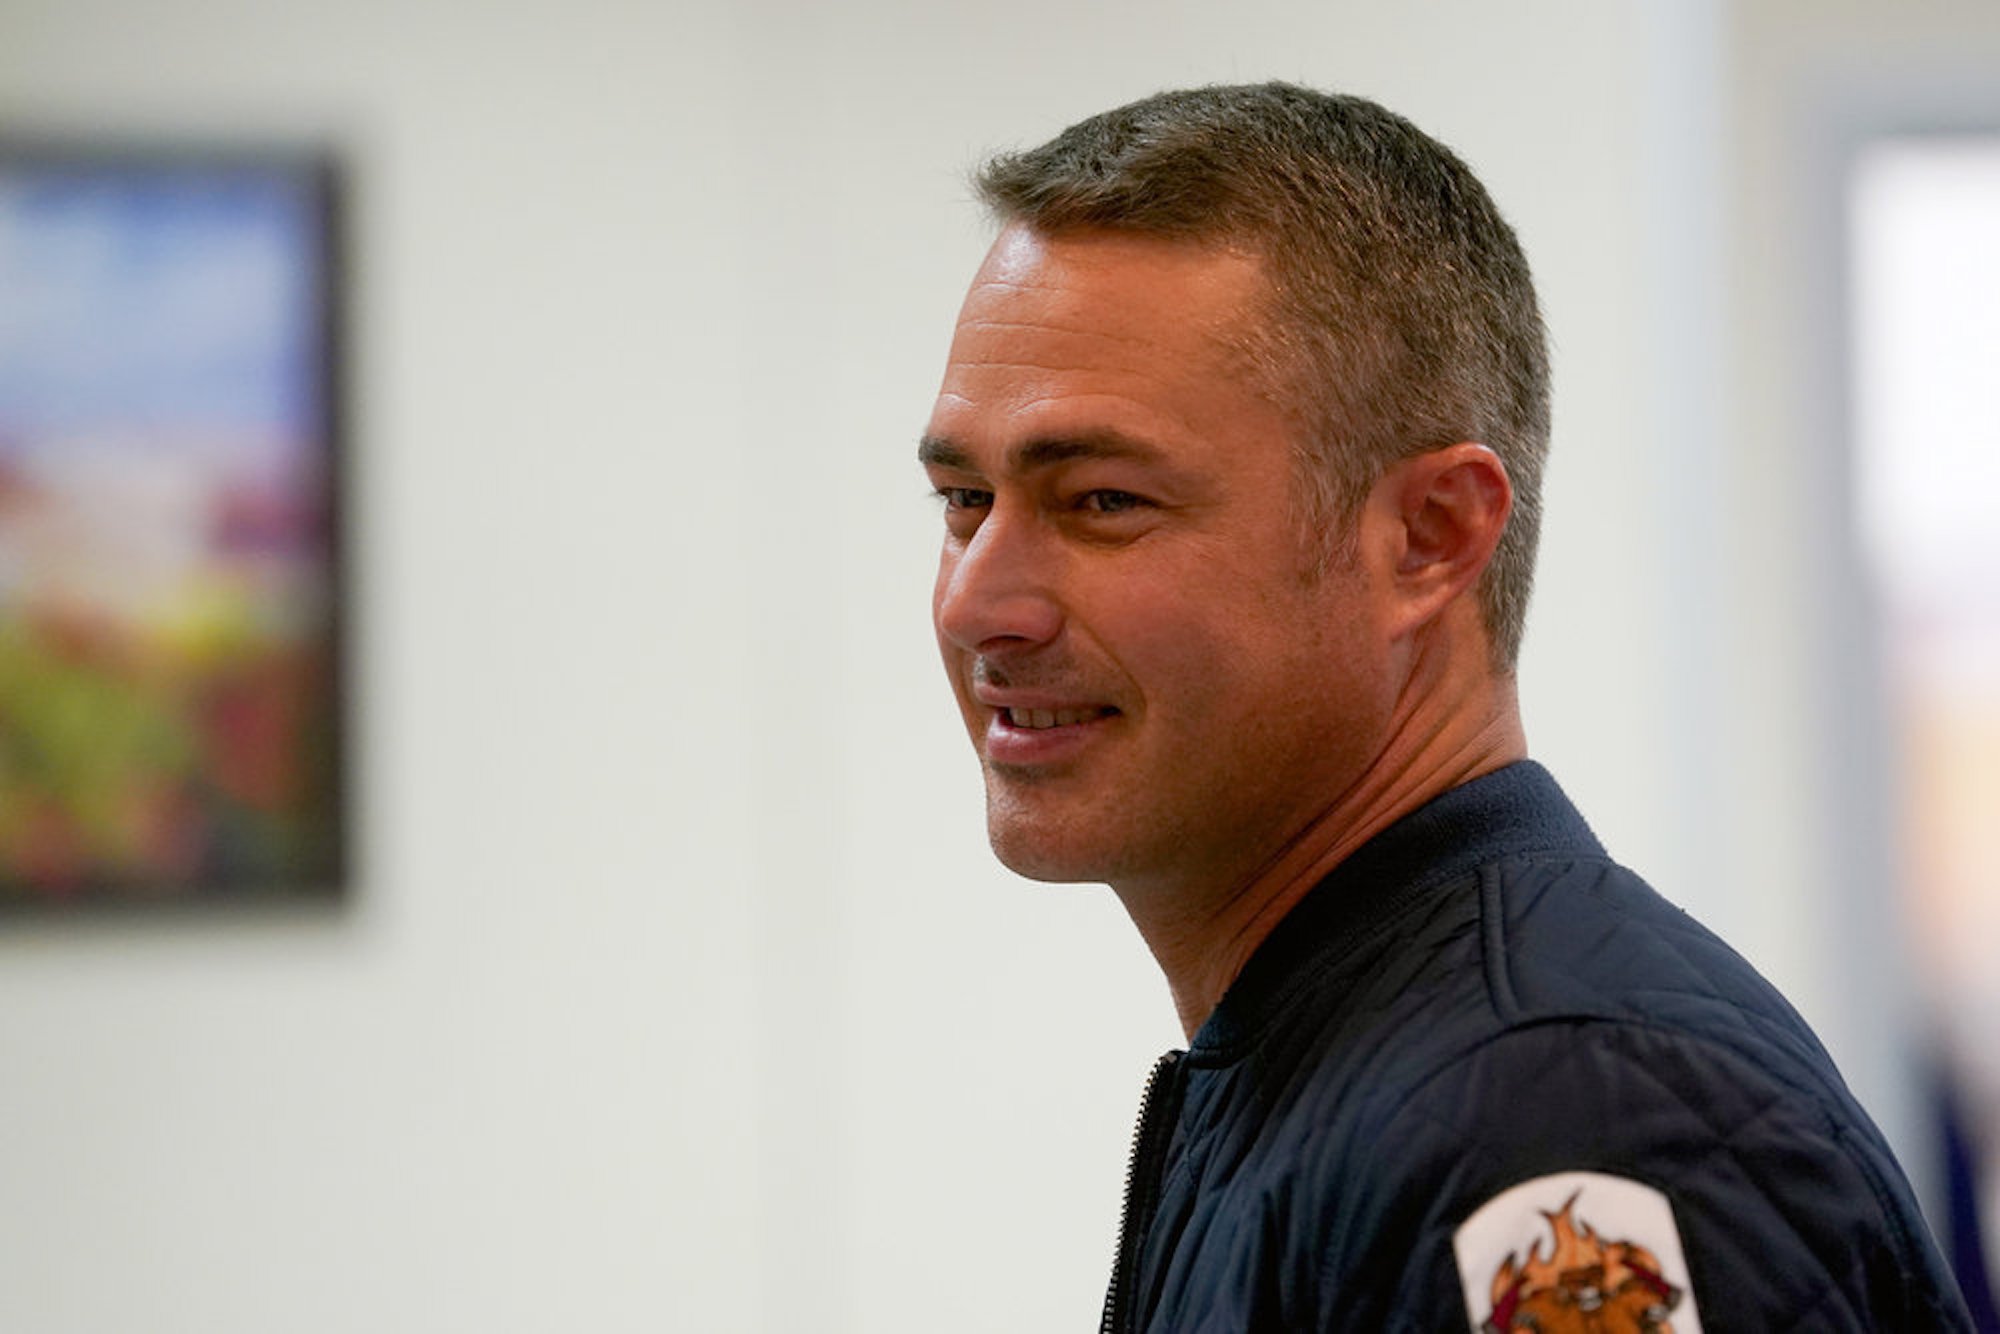 Taylor Kinney as Kelly Severide in 'Chicago Fire' episode 200. Kelly Severide plays a major role in 'Chicago Fire' Season 10 